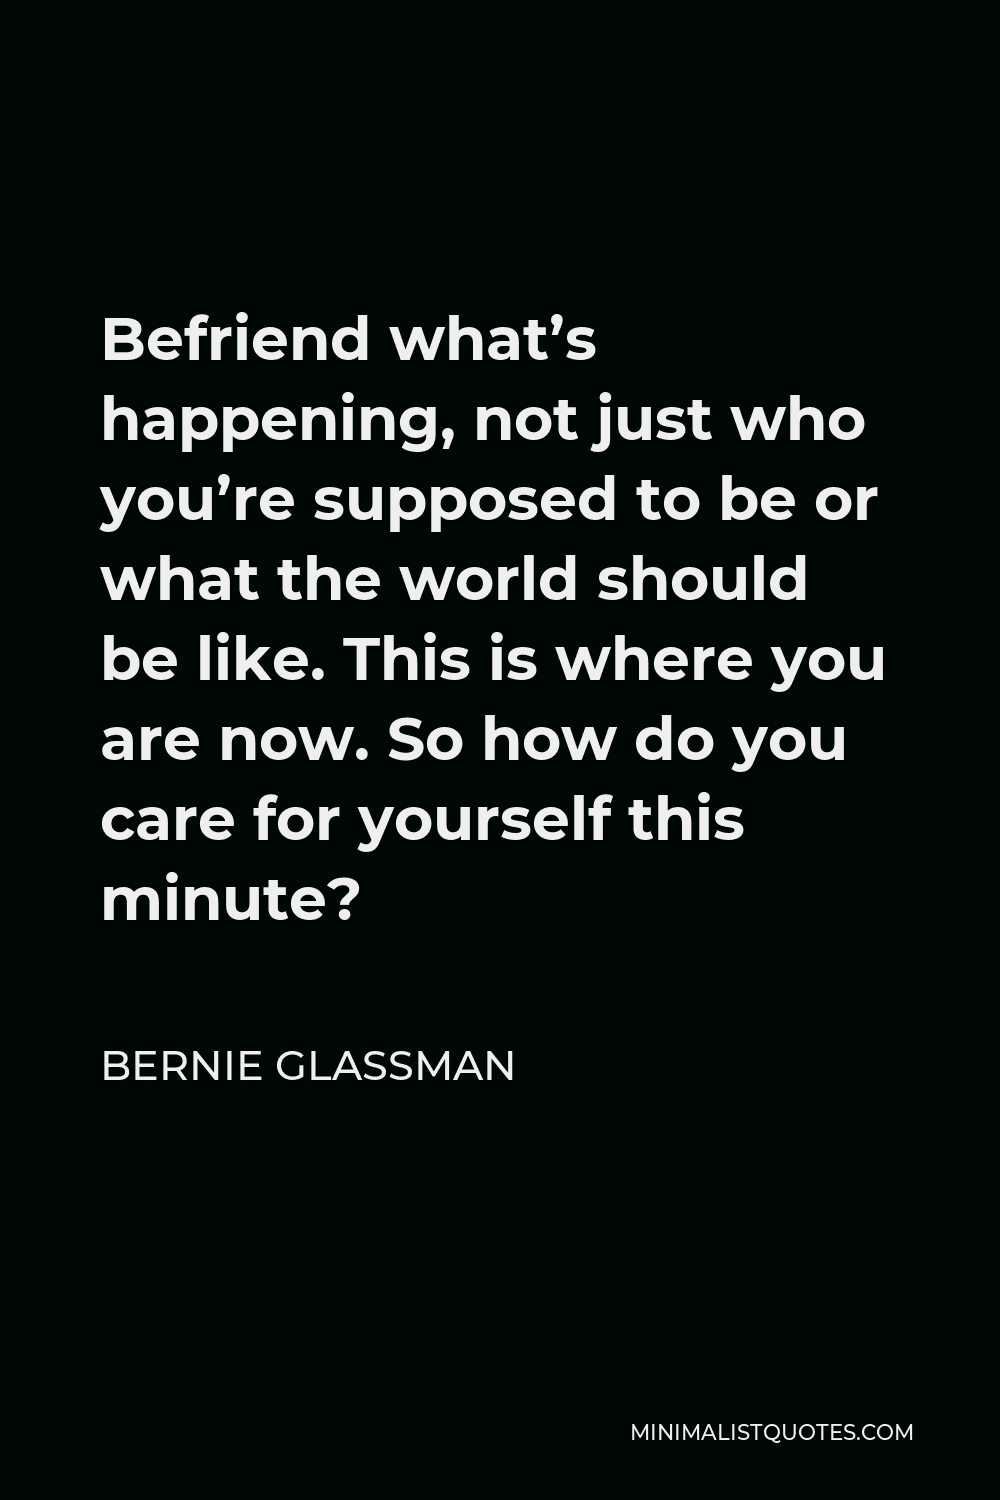 Bernie Glassman Quote - Befriend what’s happening, not just who you’re supposed to be or what the world should be like. This is where you are now. So how do you care for yourself this minute?